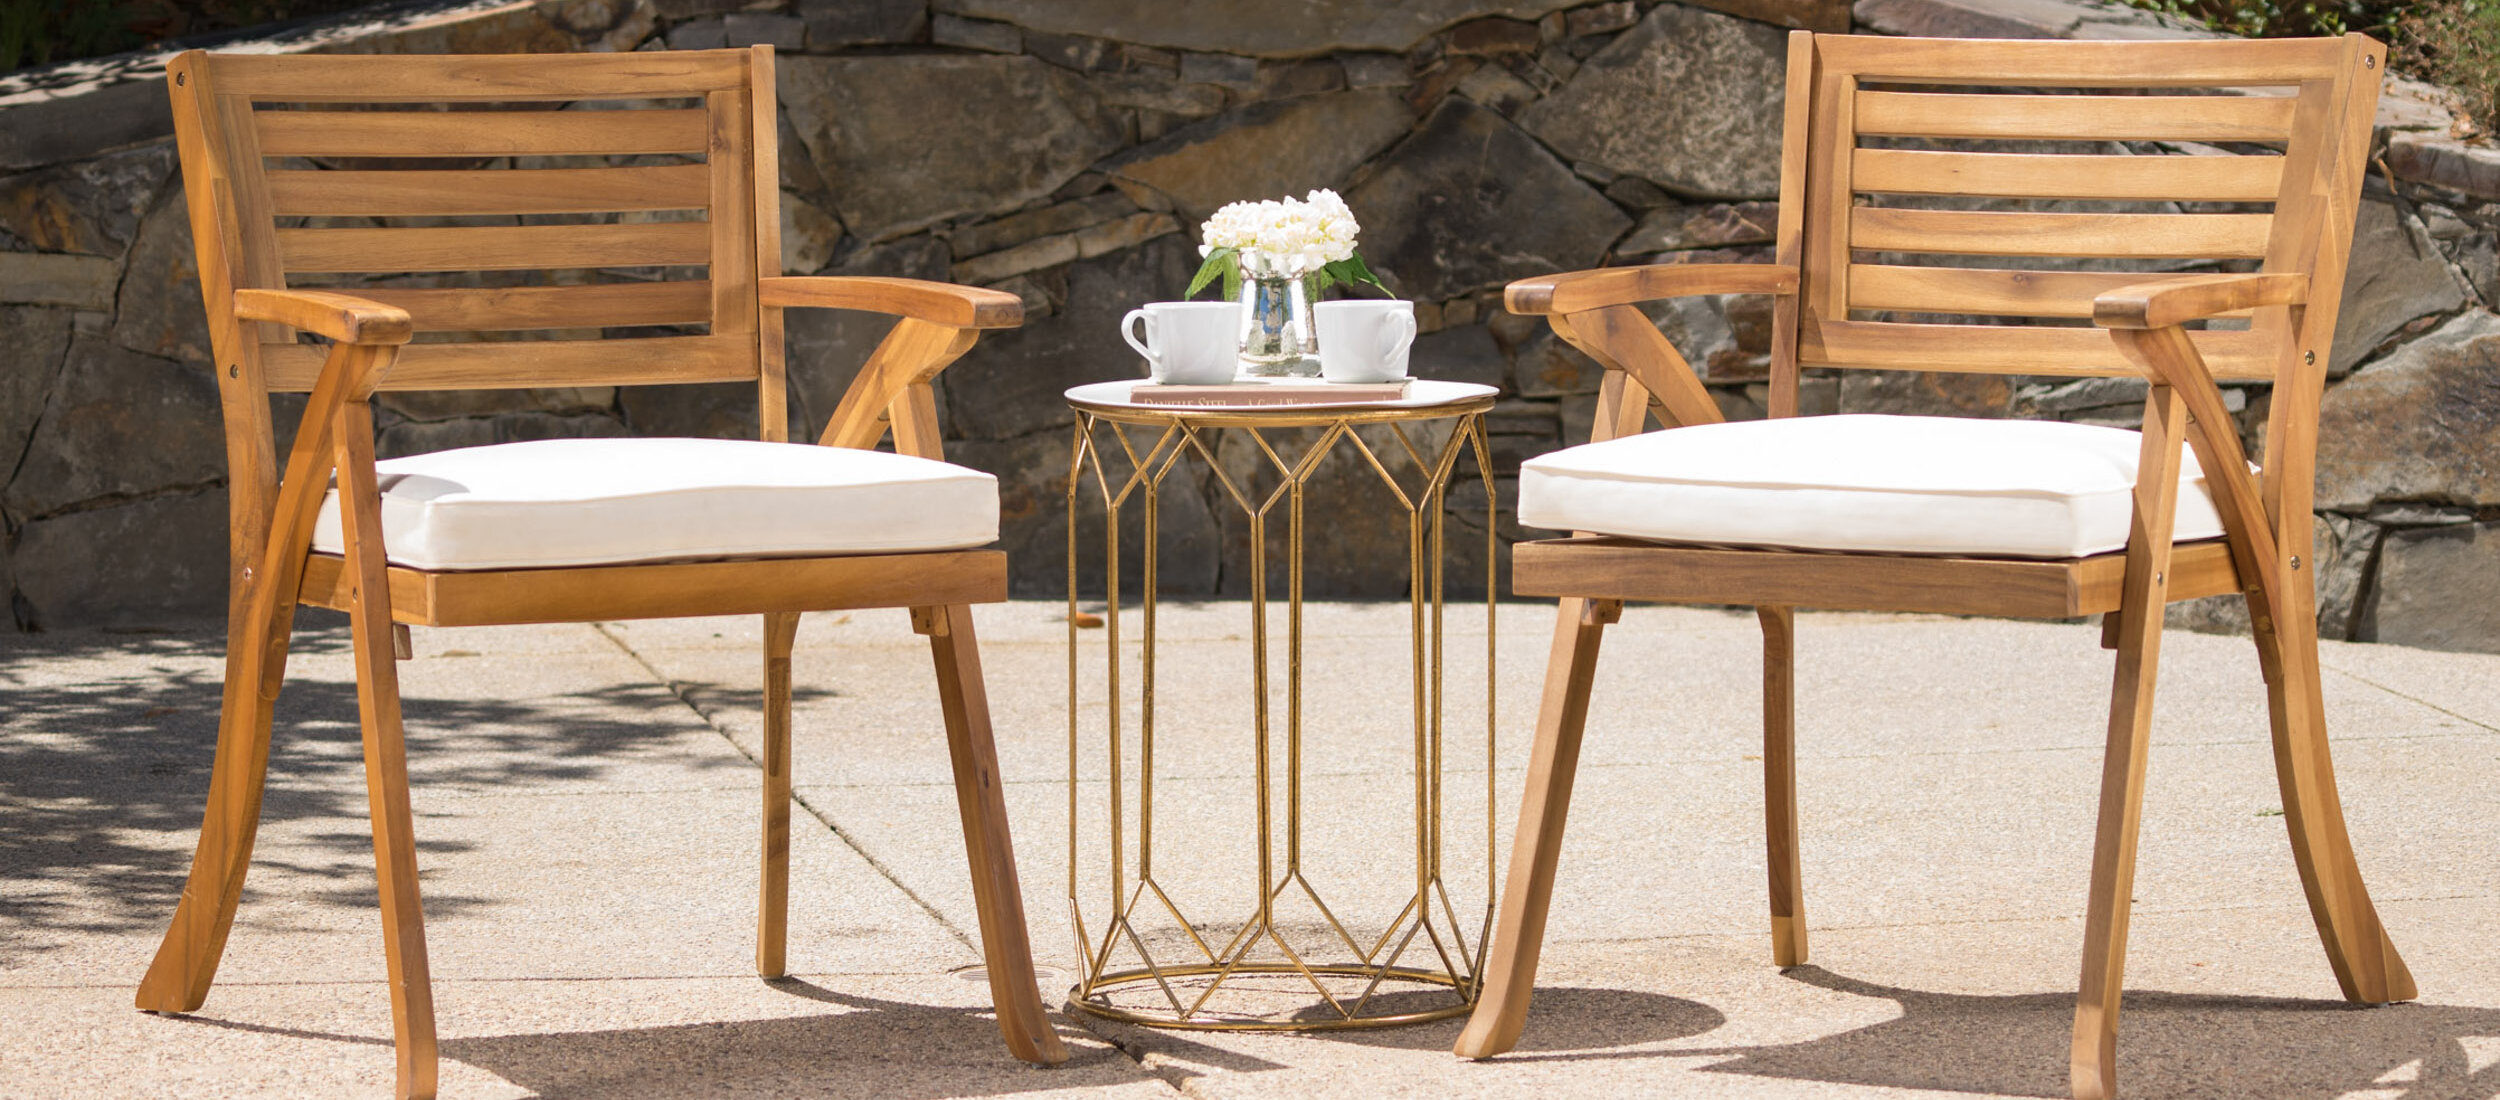 [BIG SALE] Top-Rated Patio Dining Chairs You’ll Love In 2020 | Wayfair